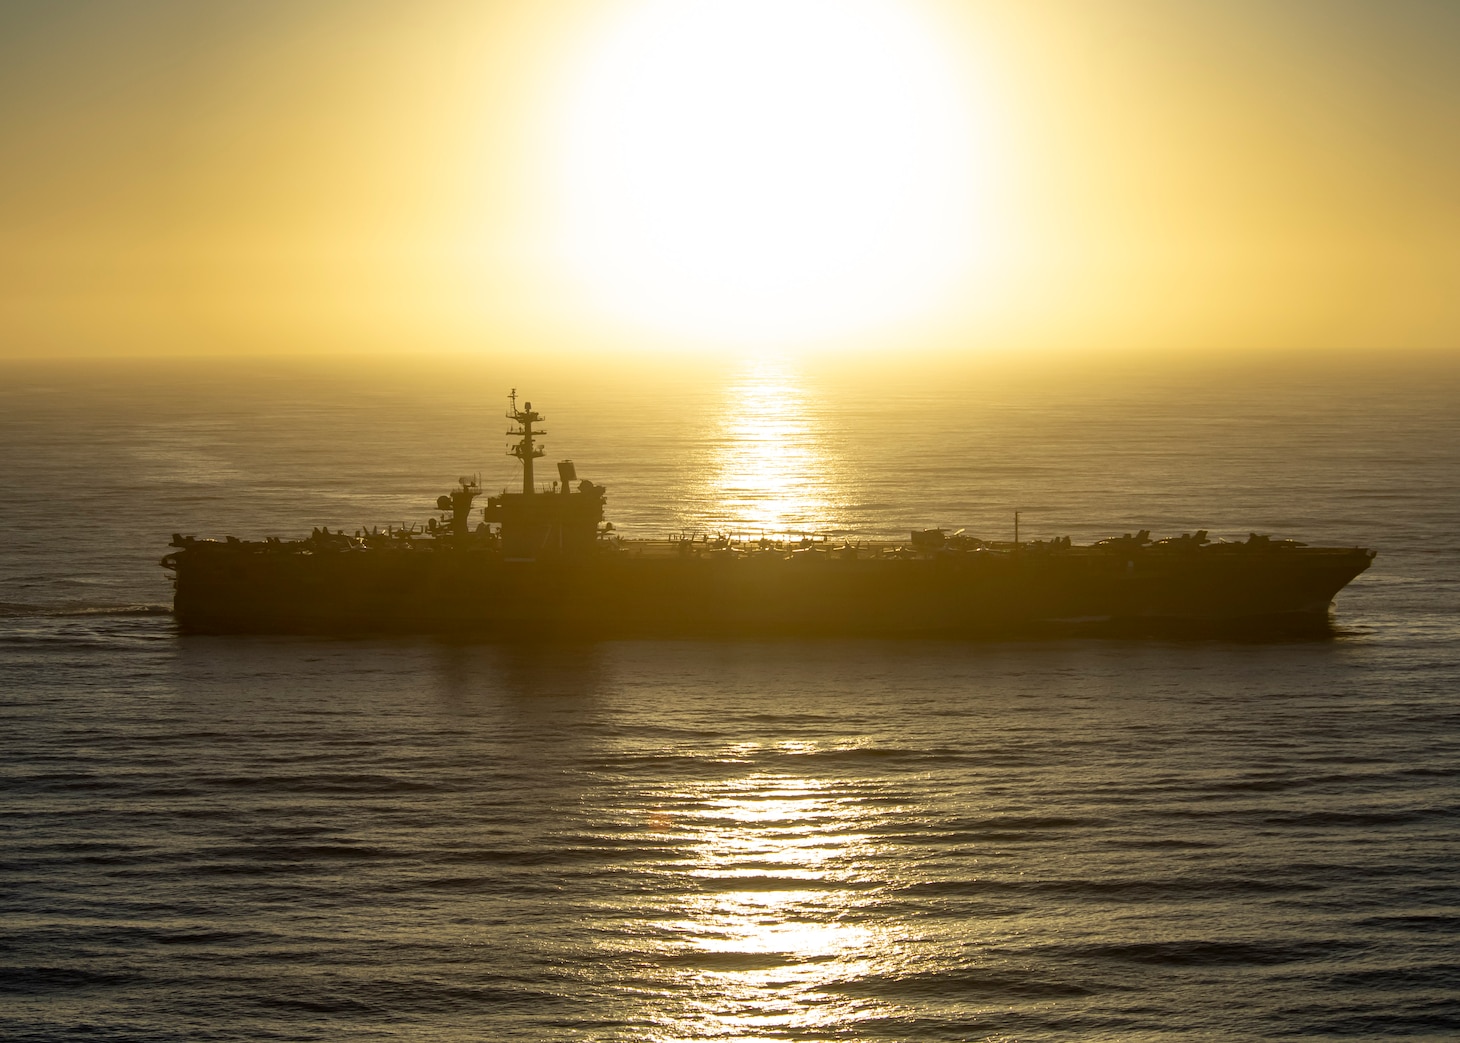 USS Theodore Roosevelt transits the Pacific Ocean.